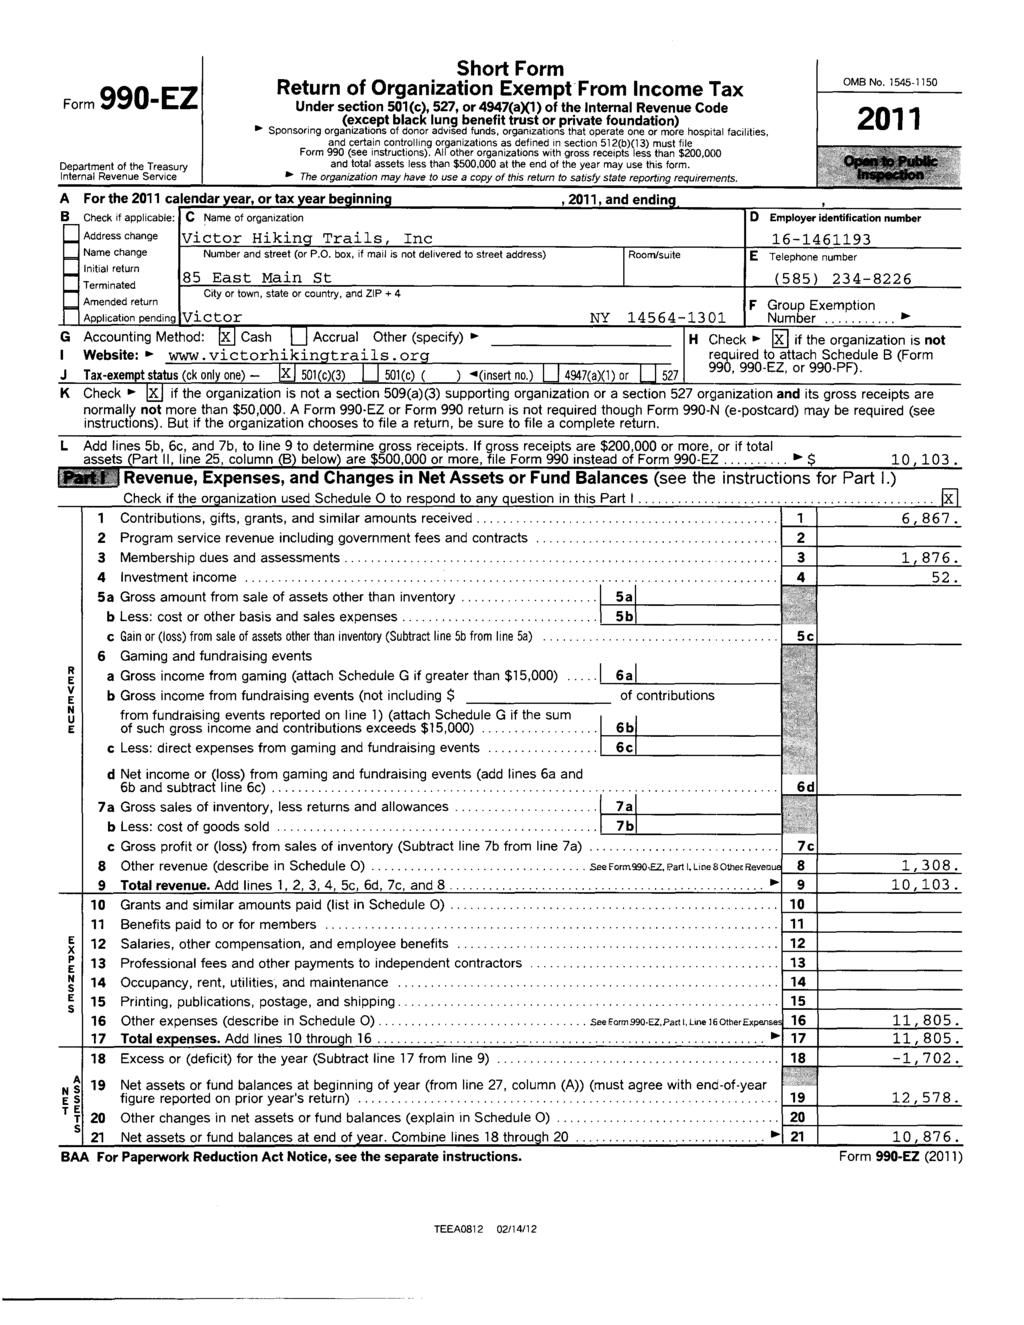 Form 990-EZ Department of the Treasury Internal Revenue Service Short Form Return of Organization Exempt FromIncome Tax Under section 501(c), 527, or 4947(a1) of the Internal Revenue Code (except